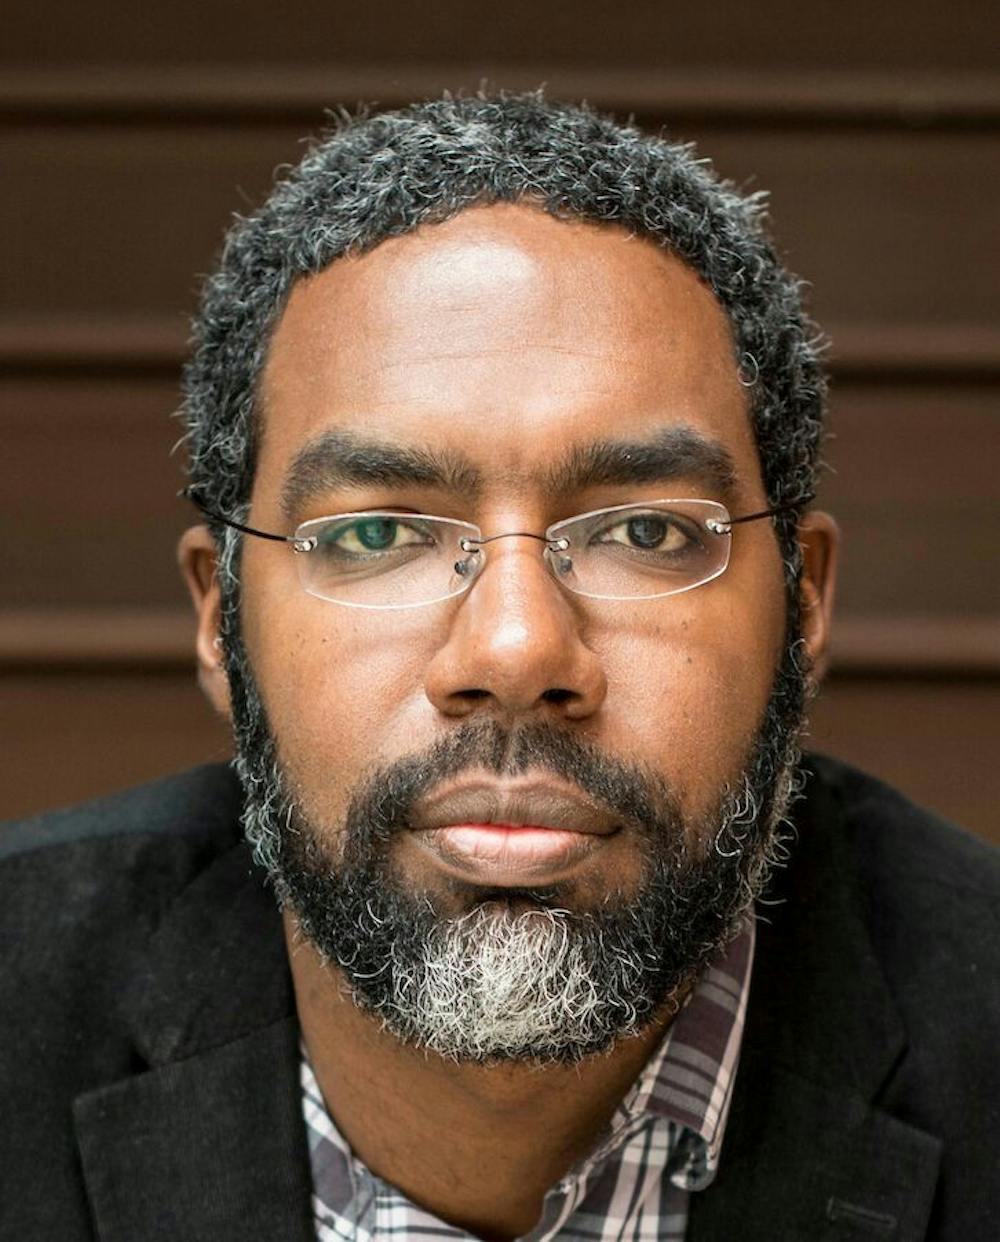 <p>Deen Freelon is an associate professor at the UNC Hussman School of Journalism and Media who specializes in political expressions through digitized media. Photo courtesy of Deen Freelon.</p>